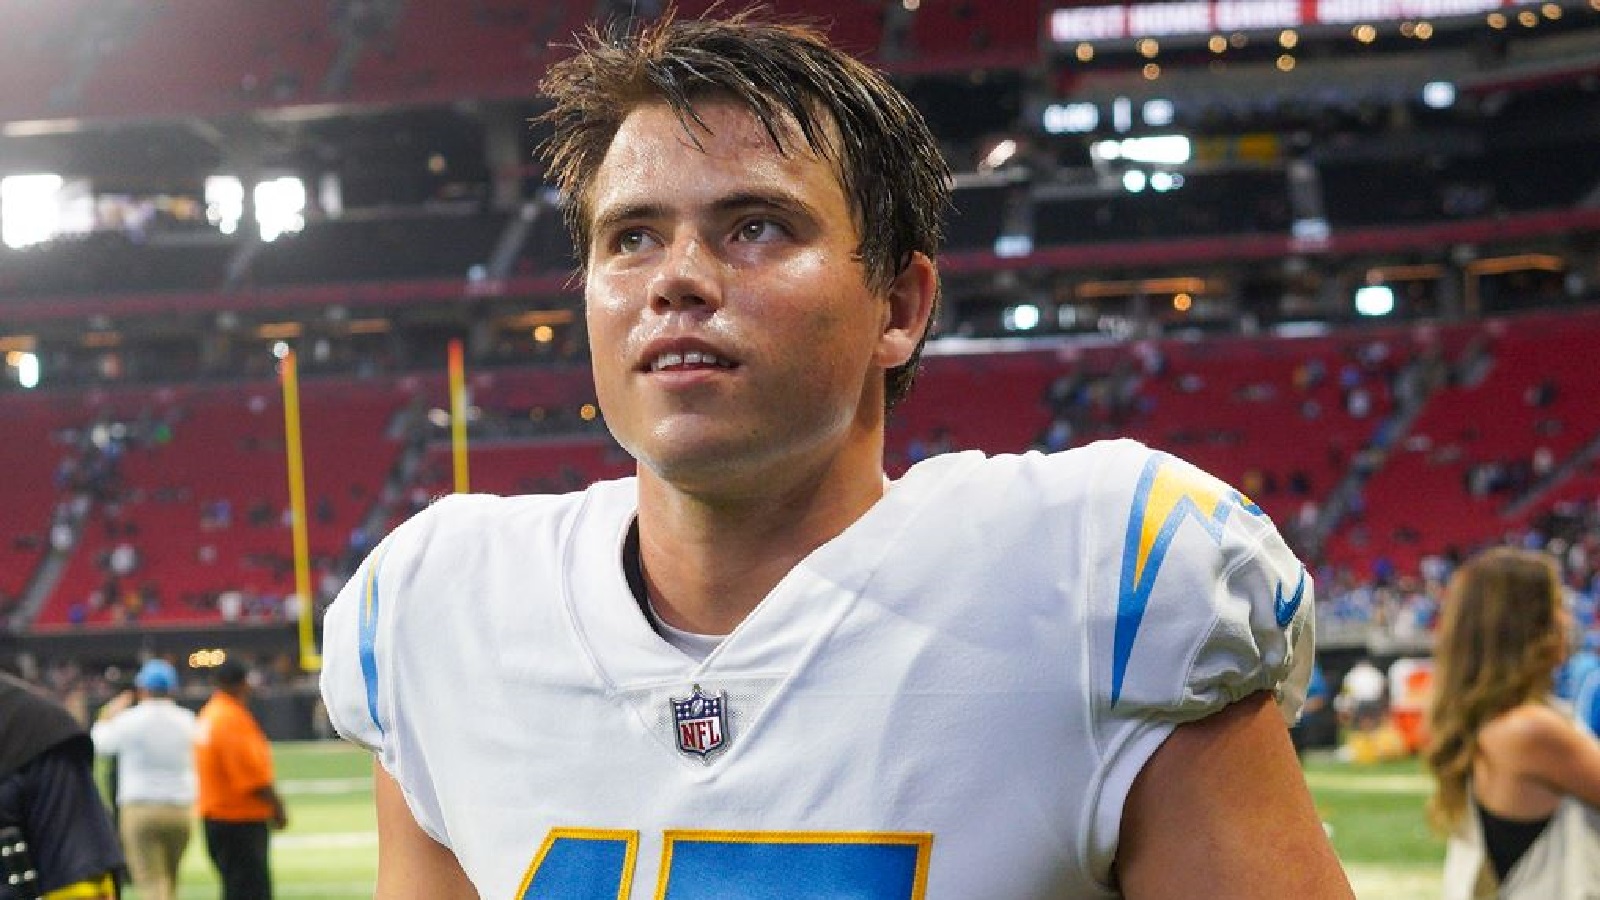 New Chargers K Cameron Dicker shares funny story after game-winning FG